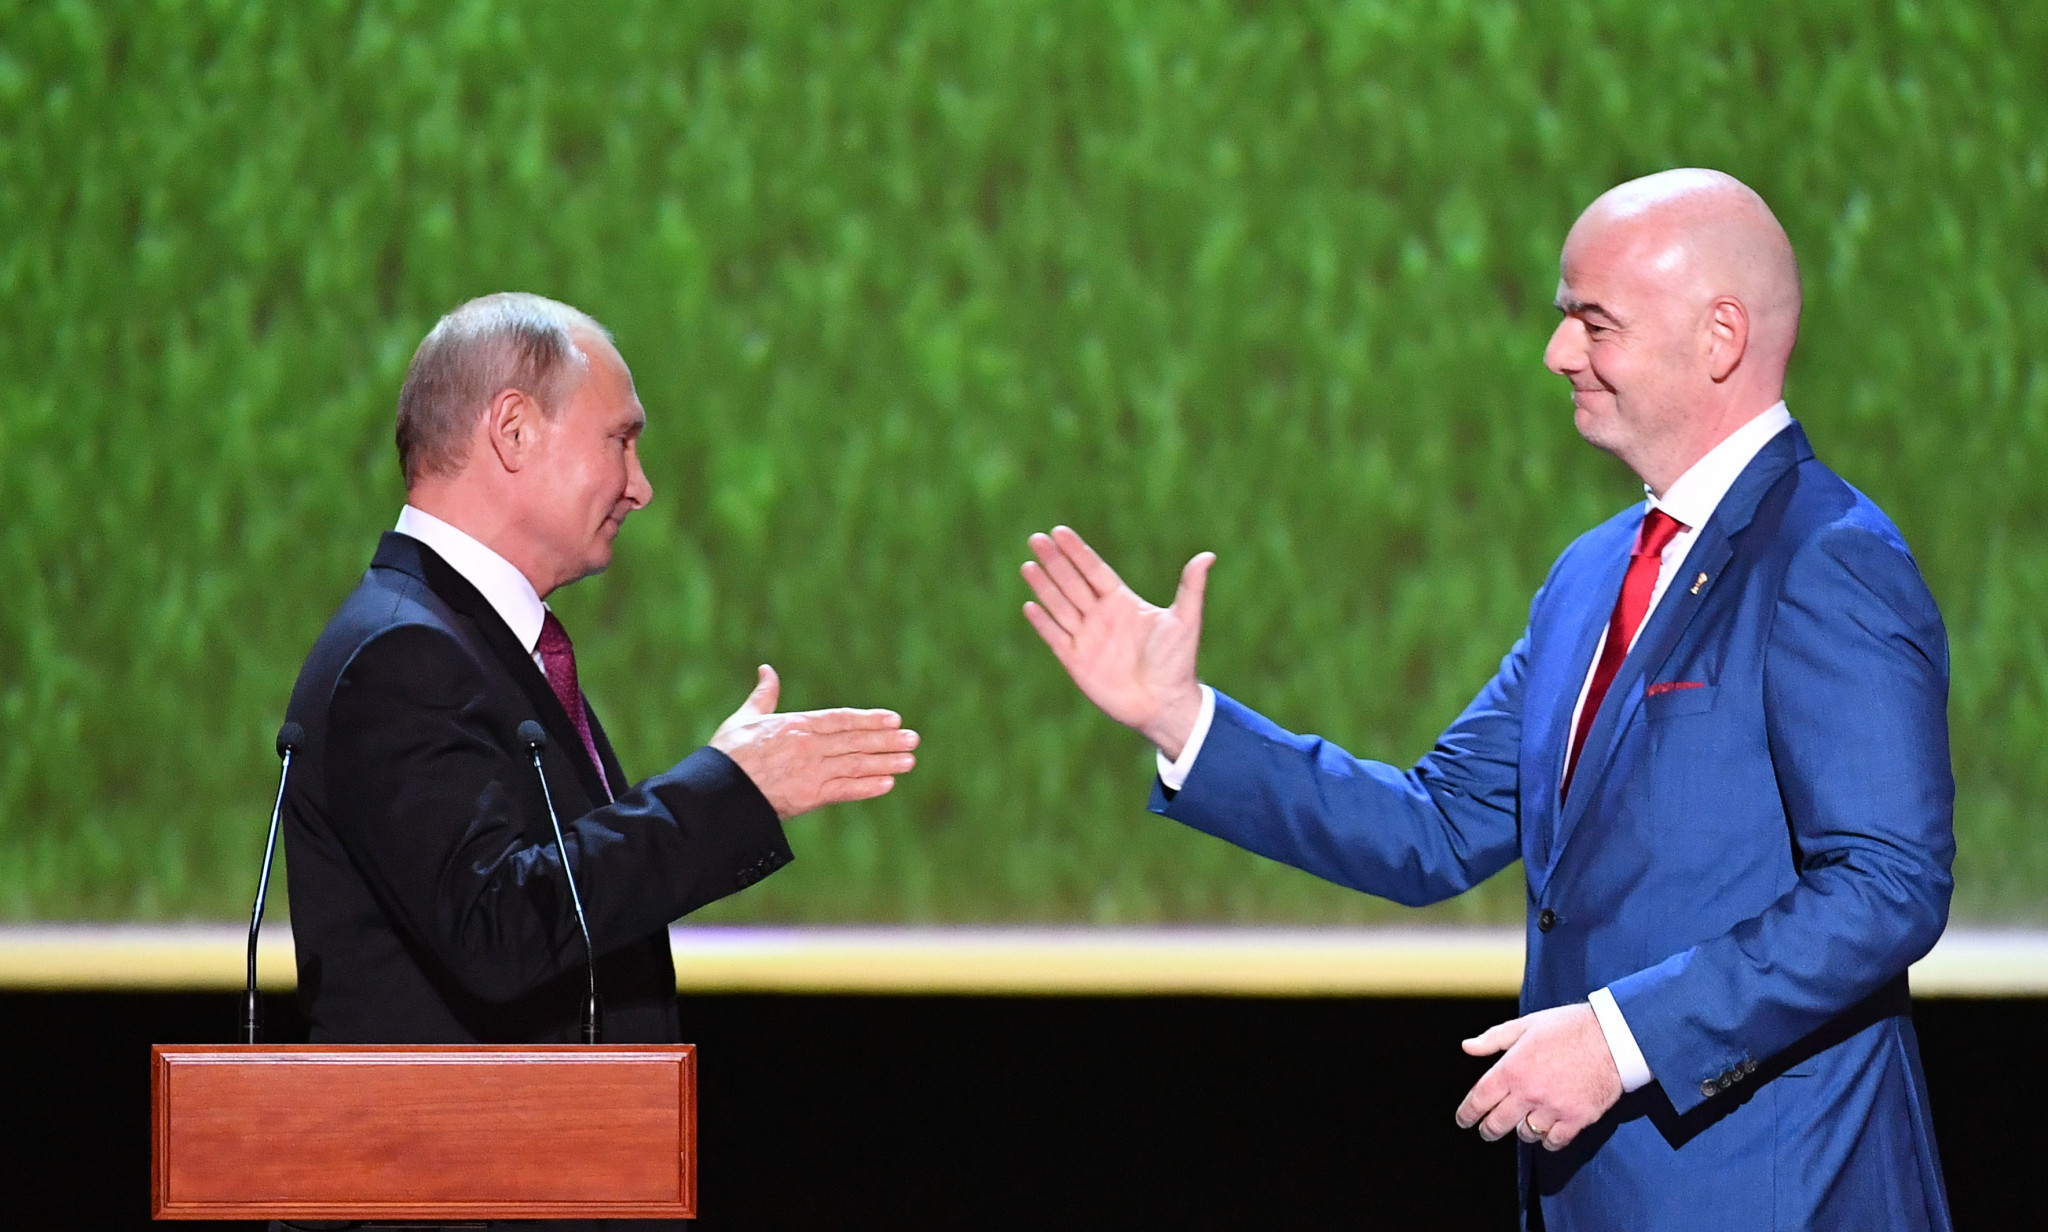 FIFA President Gianni Infantino, right, has been the subject of criticism due to this close relationship with Vladimir Putin ©Getty Images